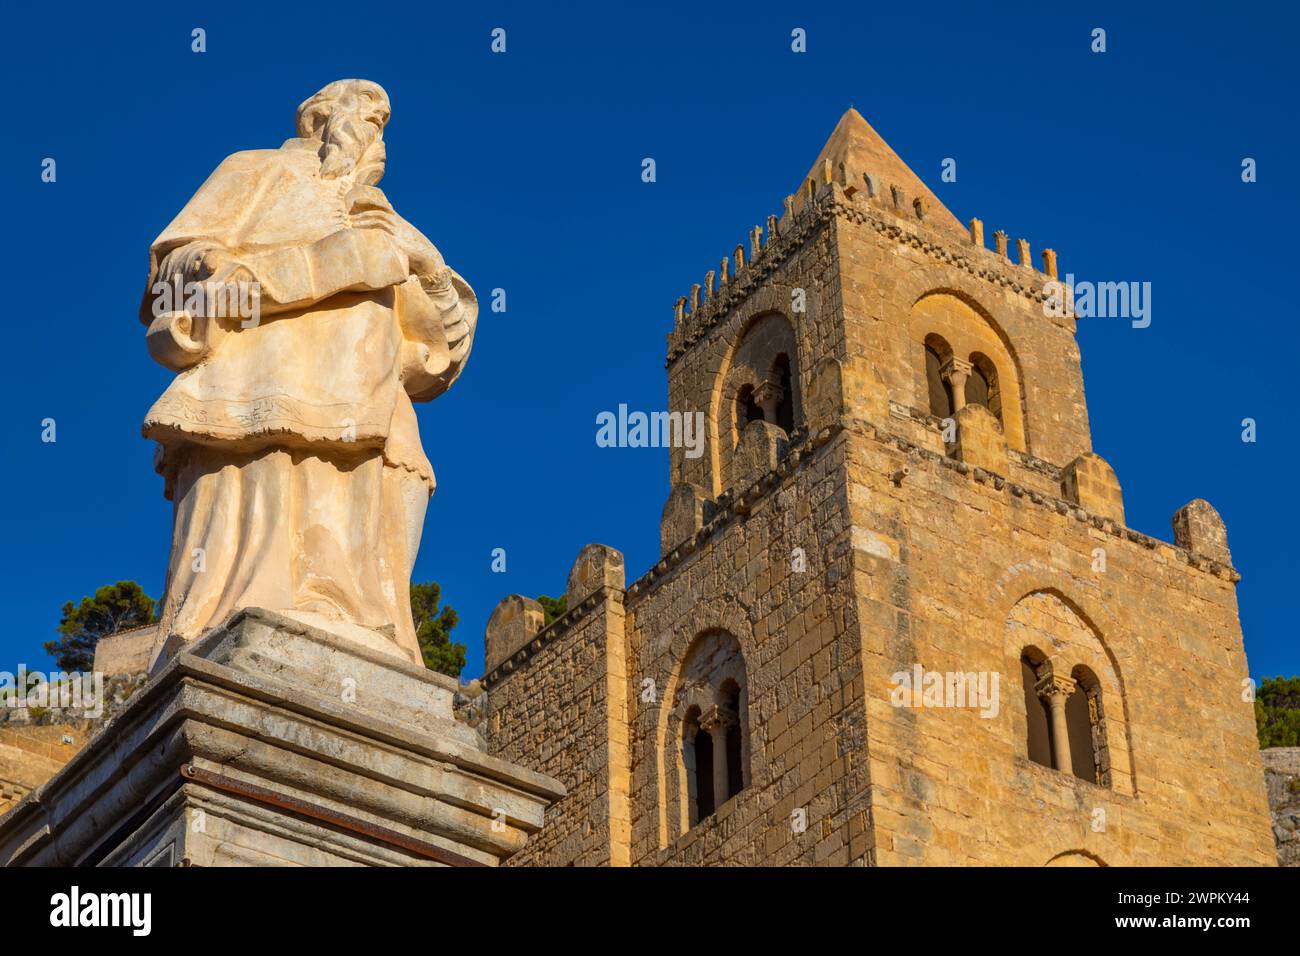 Statue of Bishop and tower, Cathedral of Cefalu, Roman Catholic Basilica, Norman architectural style, UNESCO World Hertiage Site, Province of Palermo Stock Photo